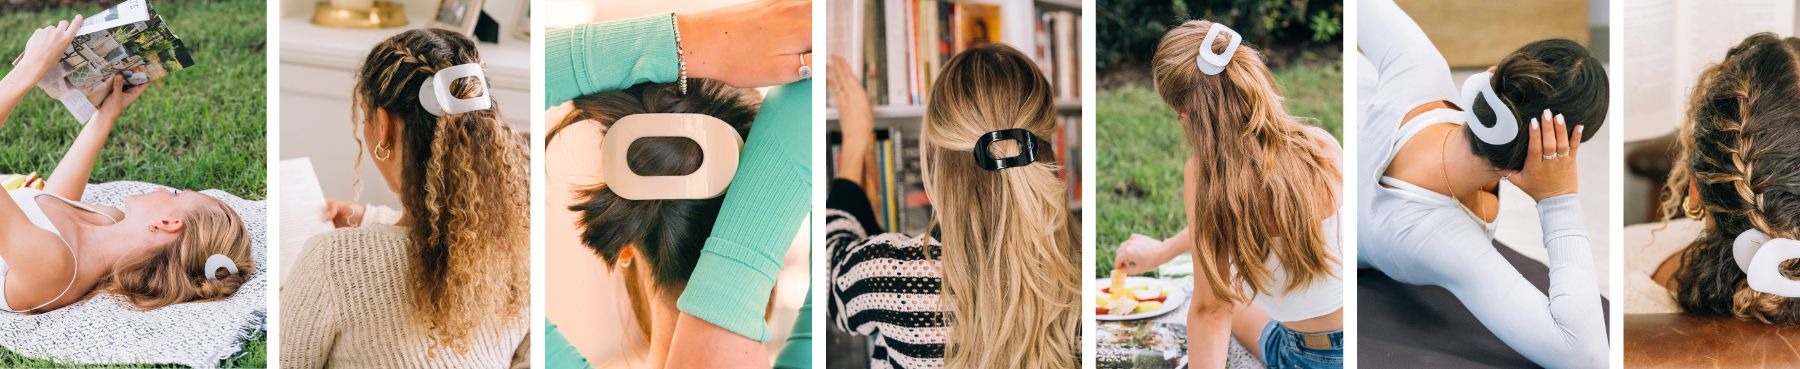 Ultra Comfy Flat Hair Clips in the Latest Styles – TELETIES